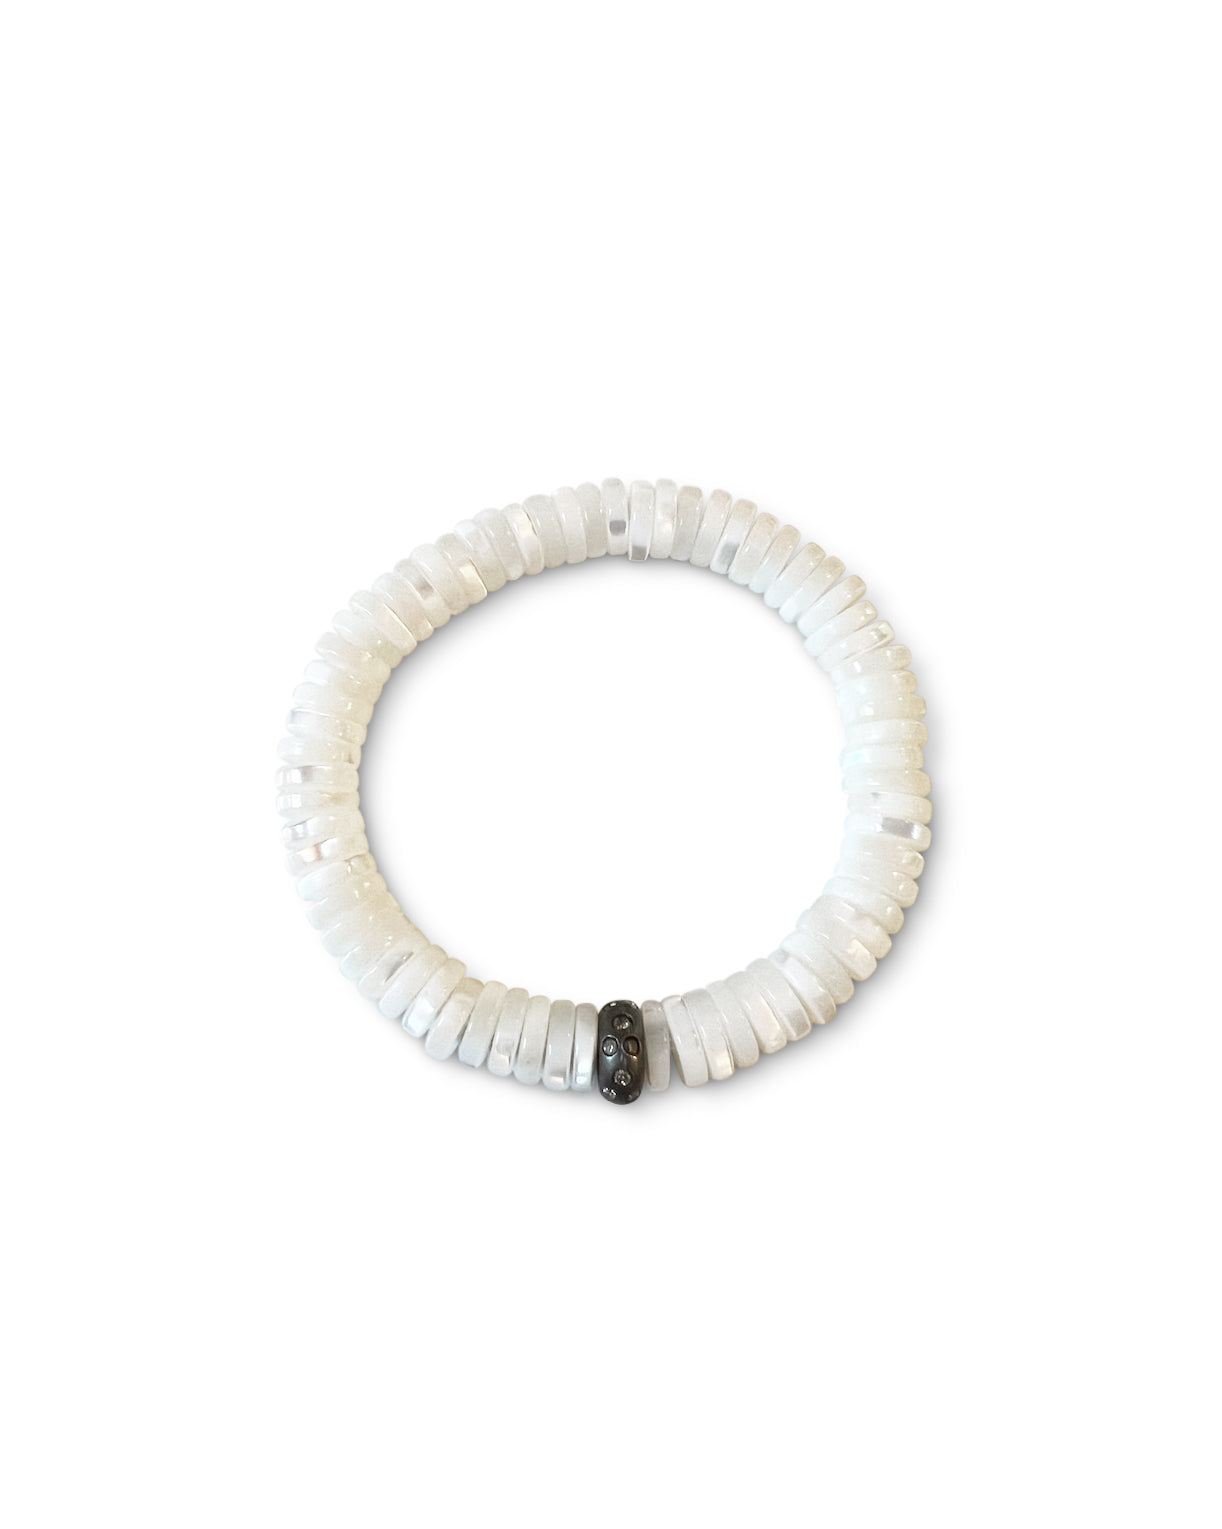 Mother of Pearl Heishi Beads with Pave Diamond Rondelle set in Sterling Silver